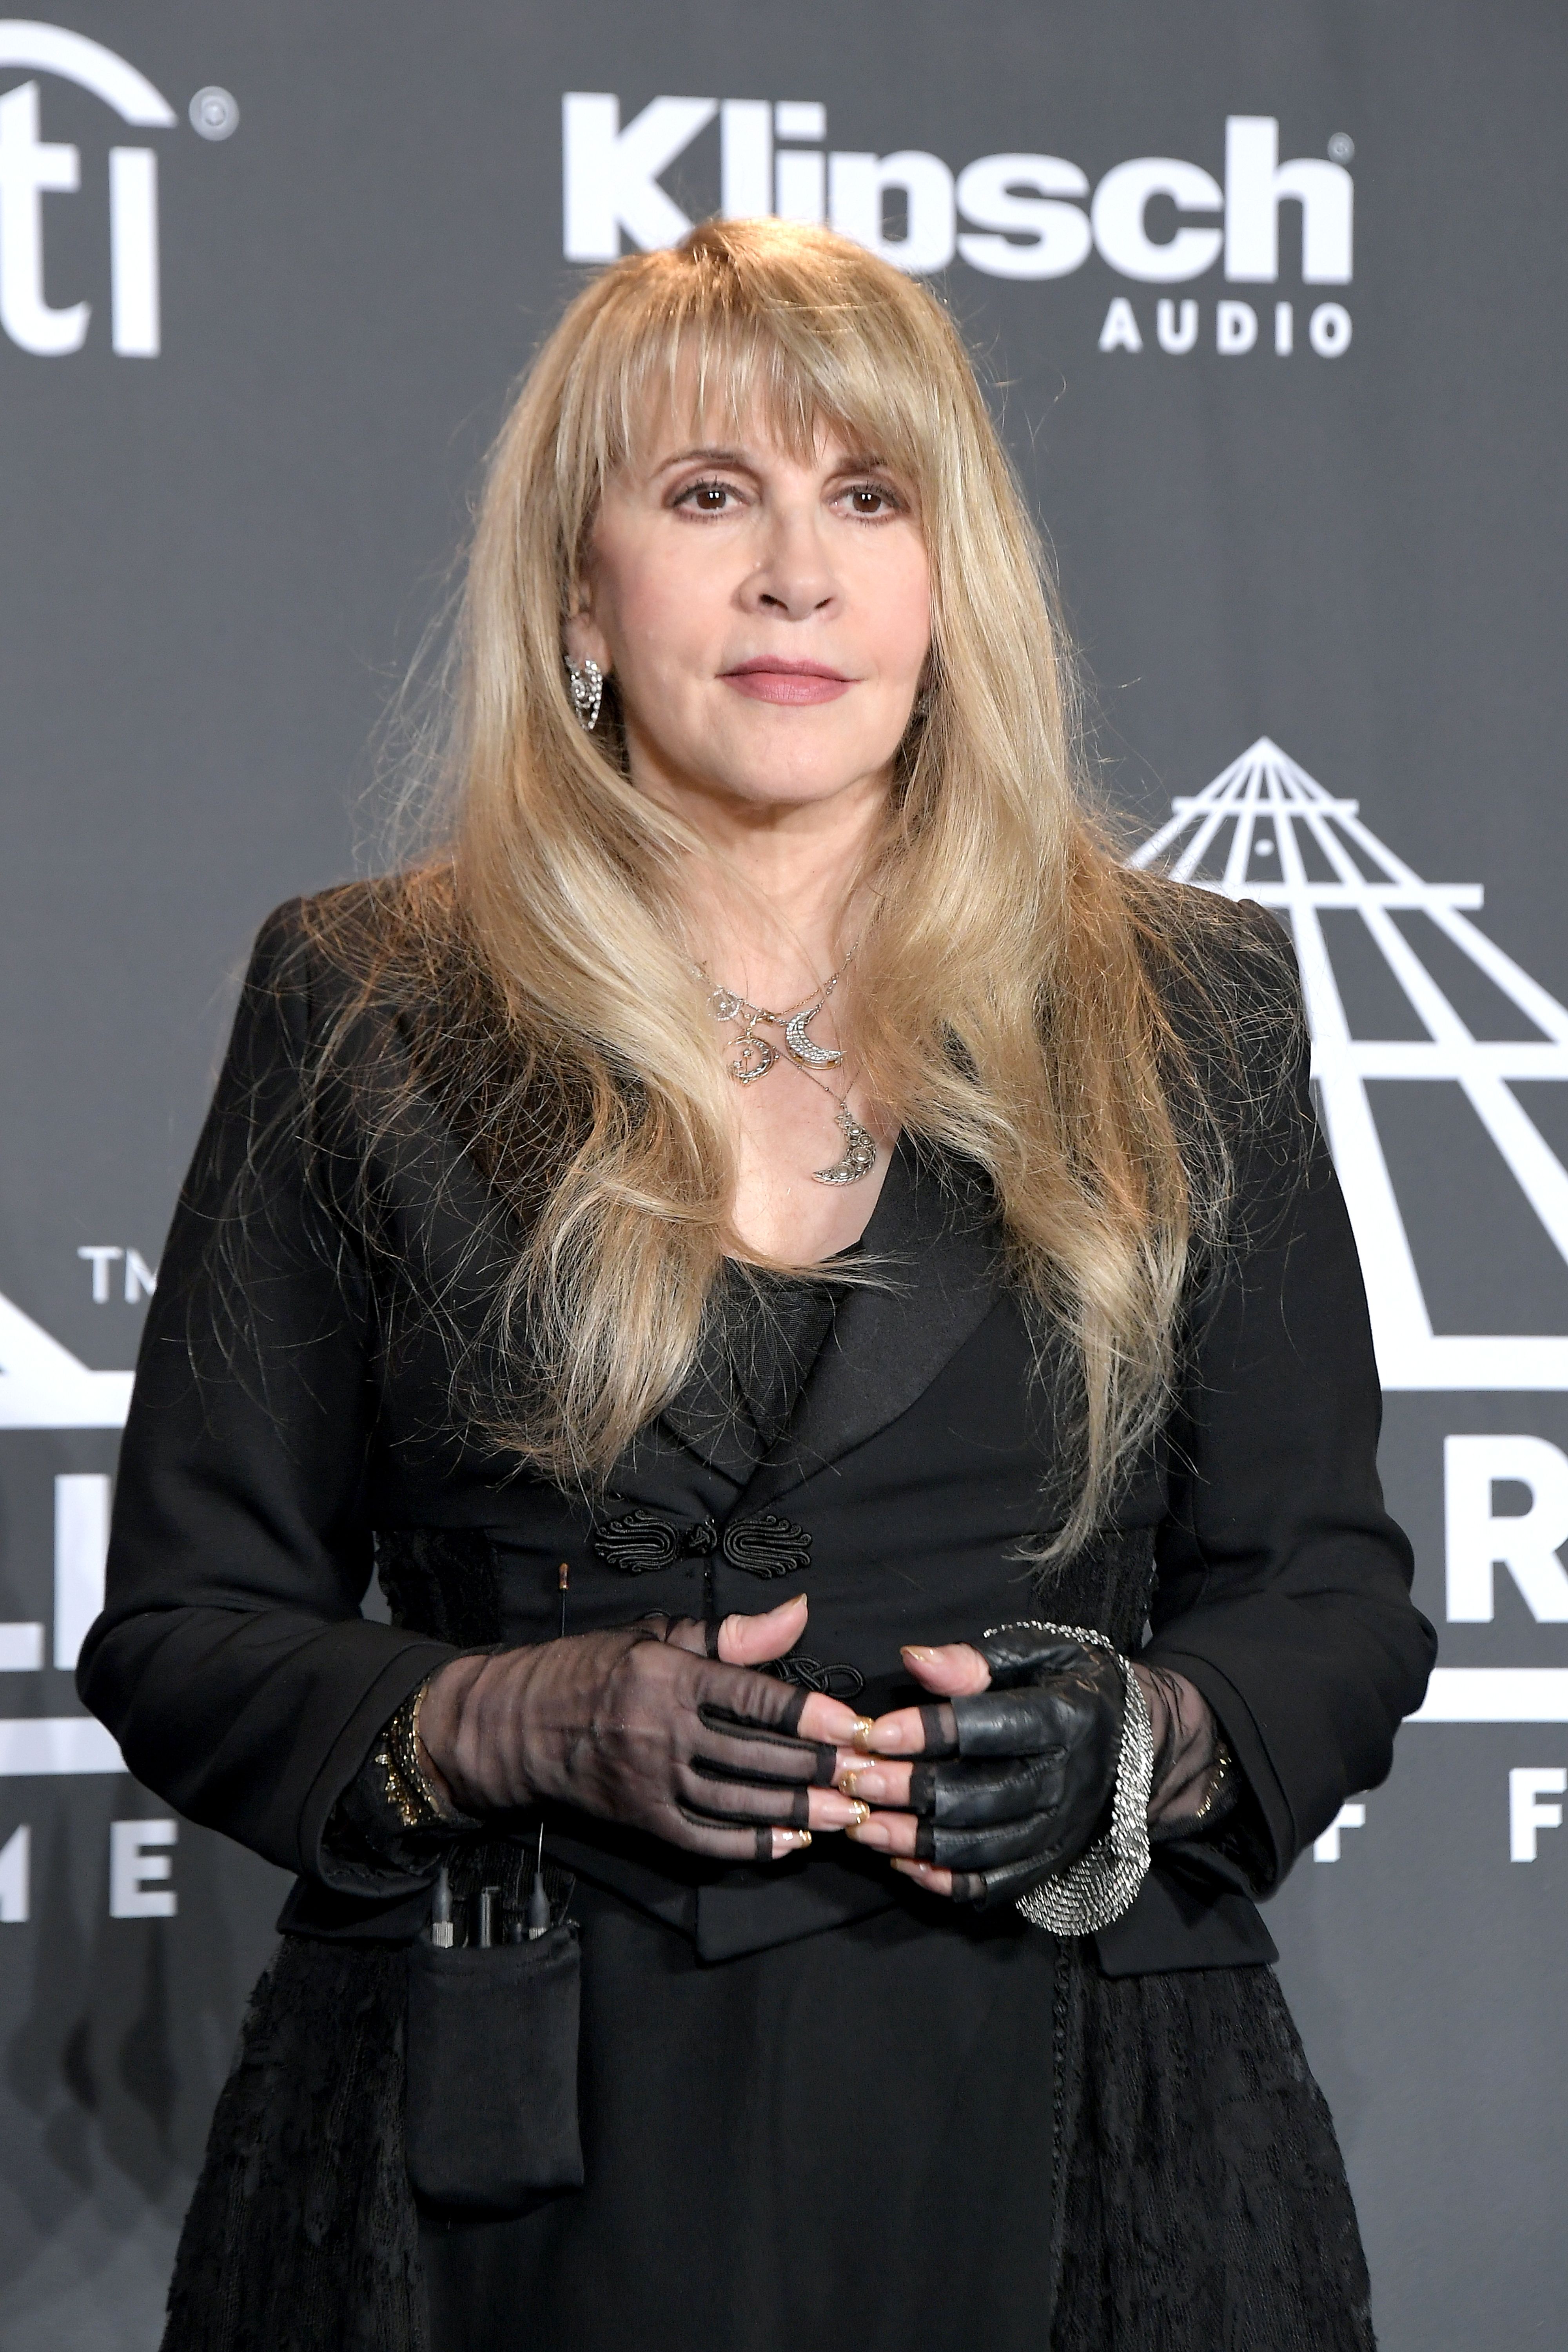 Stevie Nicks at the 2019 Rock & Roll Hall Of Fame Induction Ceremony in New York City | Source: Getty Images